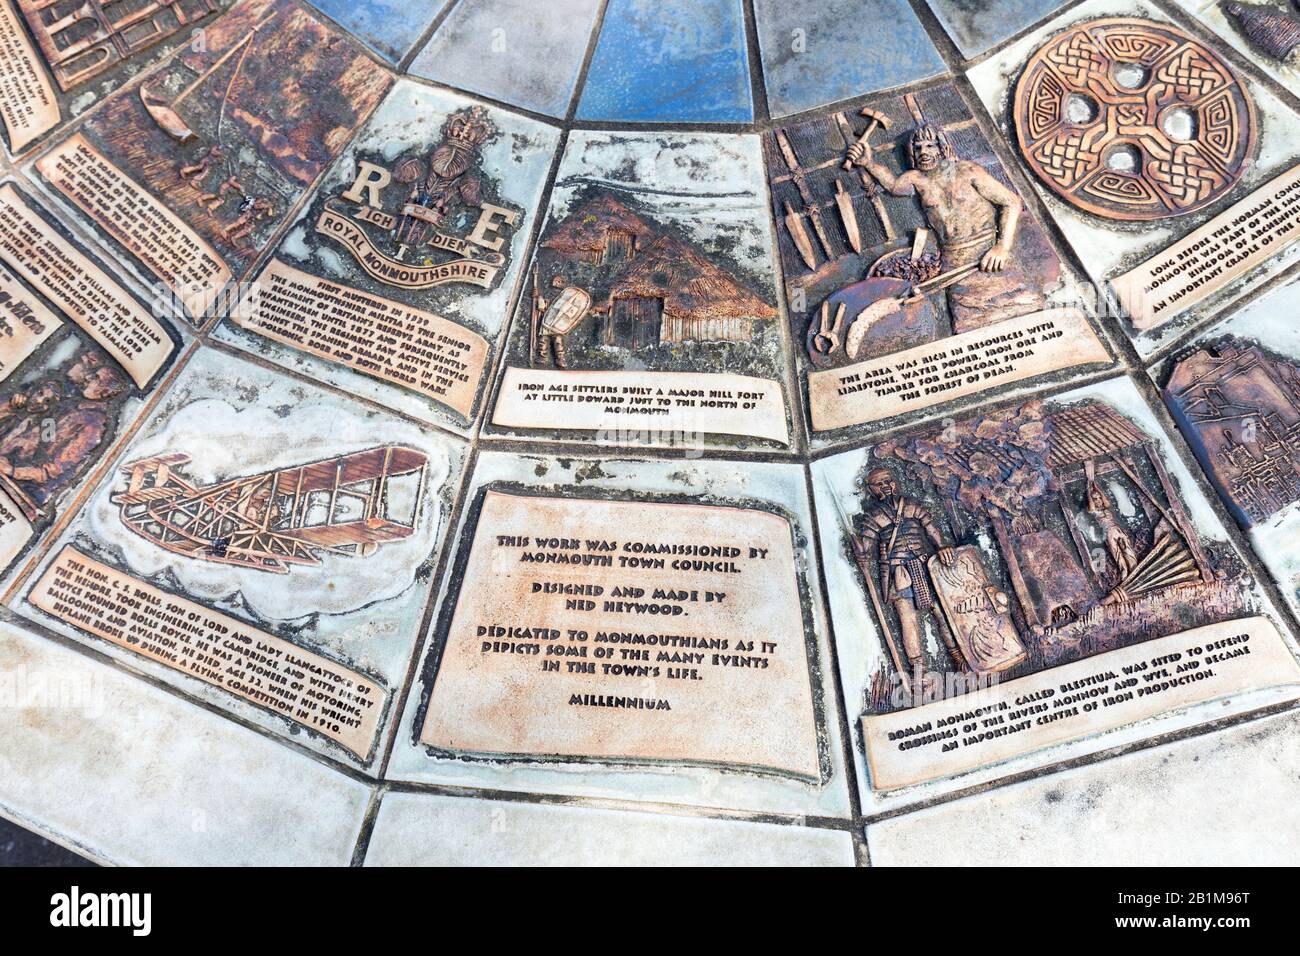 Part of Millennium ceramic mosaic wheel by Ned Heywood at the Monnow Bridge commemorating Monmouth's history, Wales, UK Stock Photo